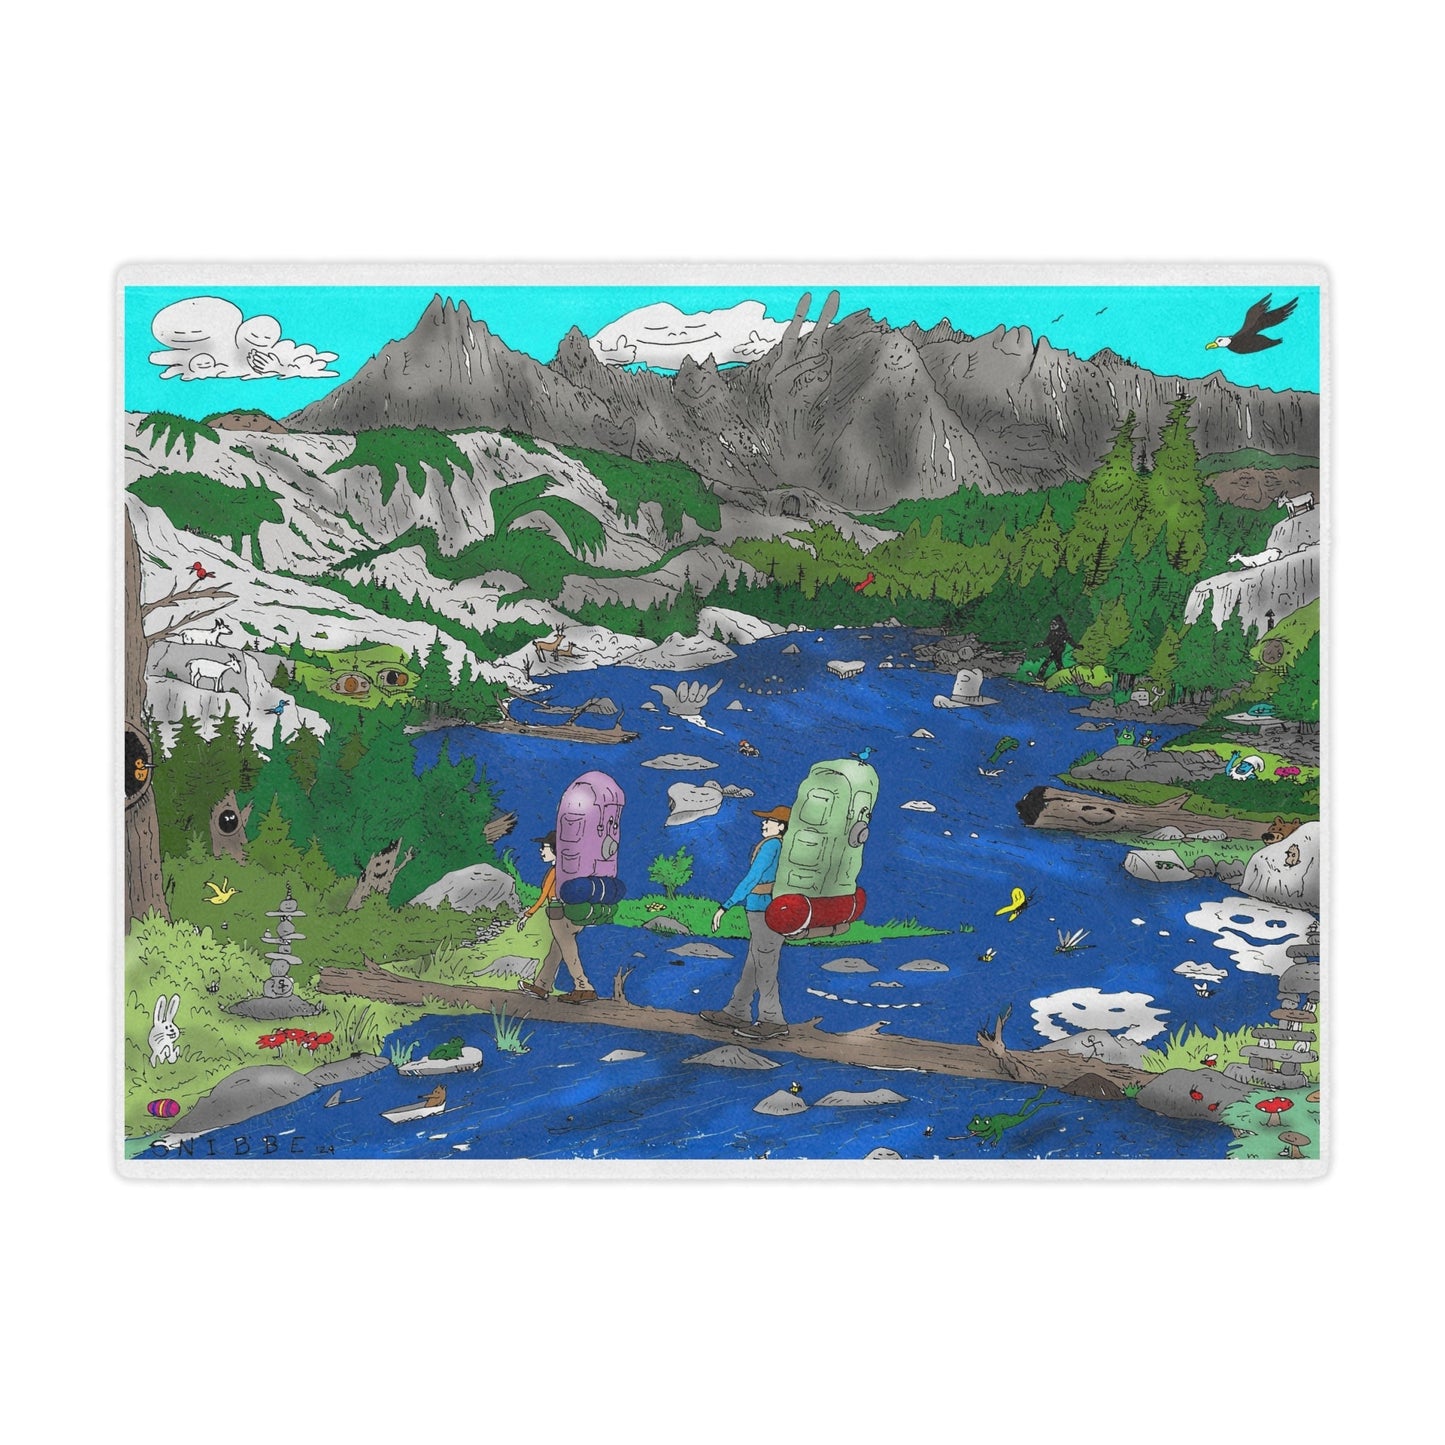 The Enchantments blanket